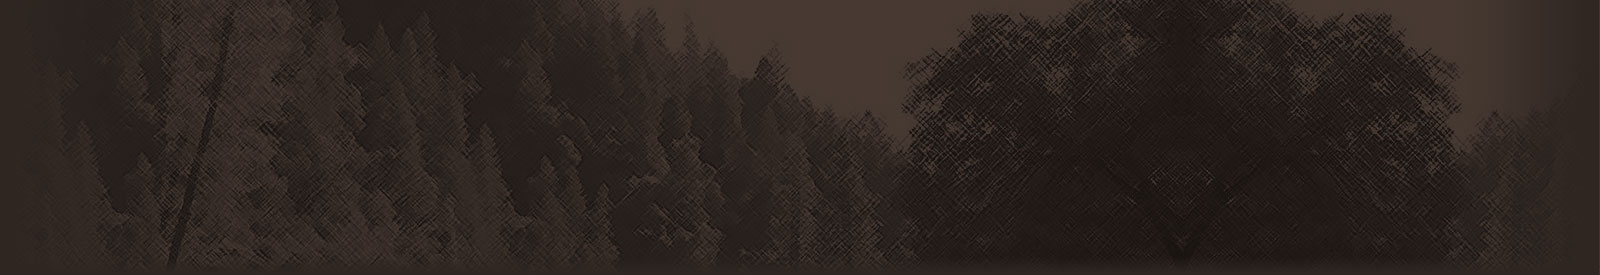 heavily processed and pixelated image of trees